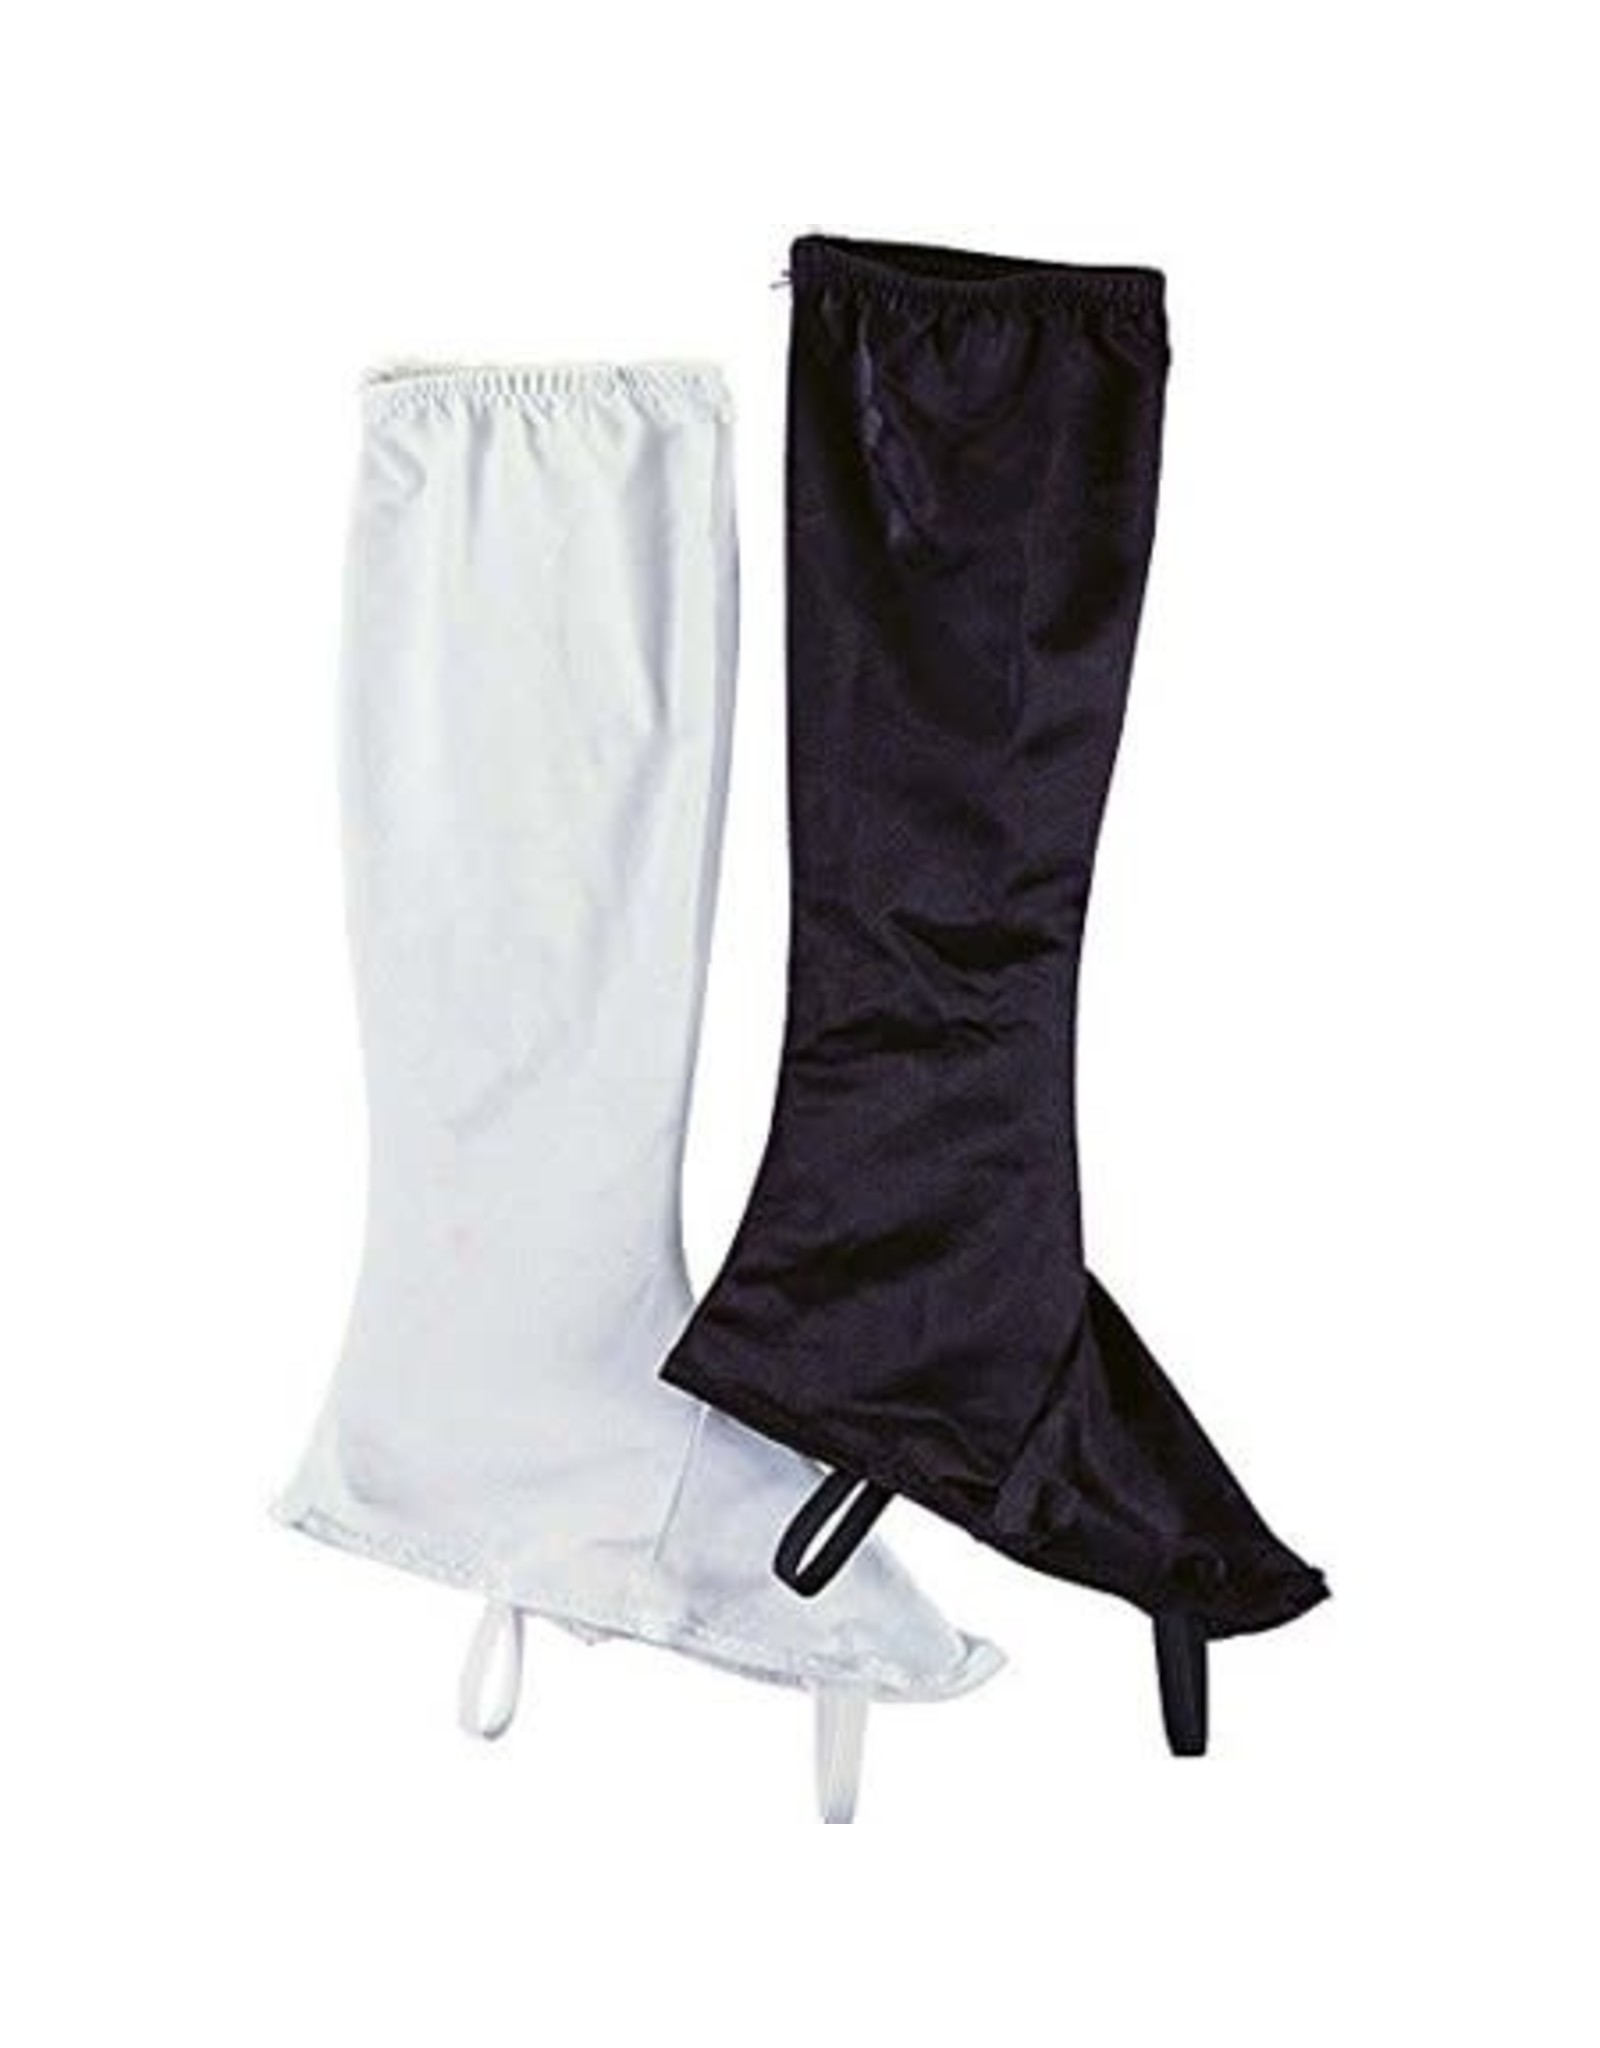 Rubie's Costumes "Ladies' Stretch Boot Tops Costume, White